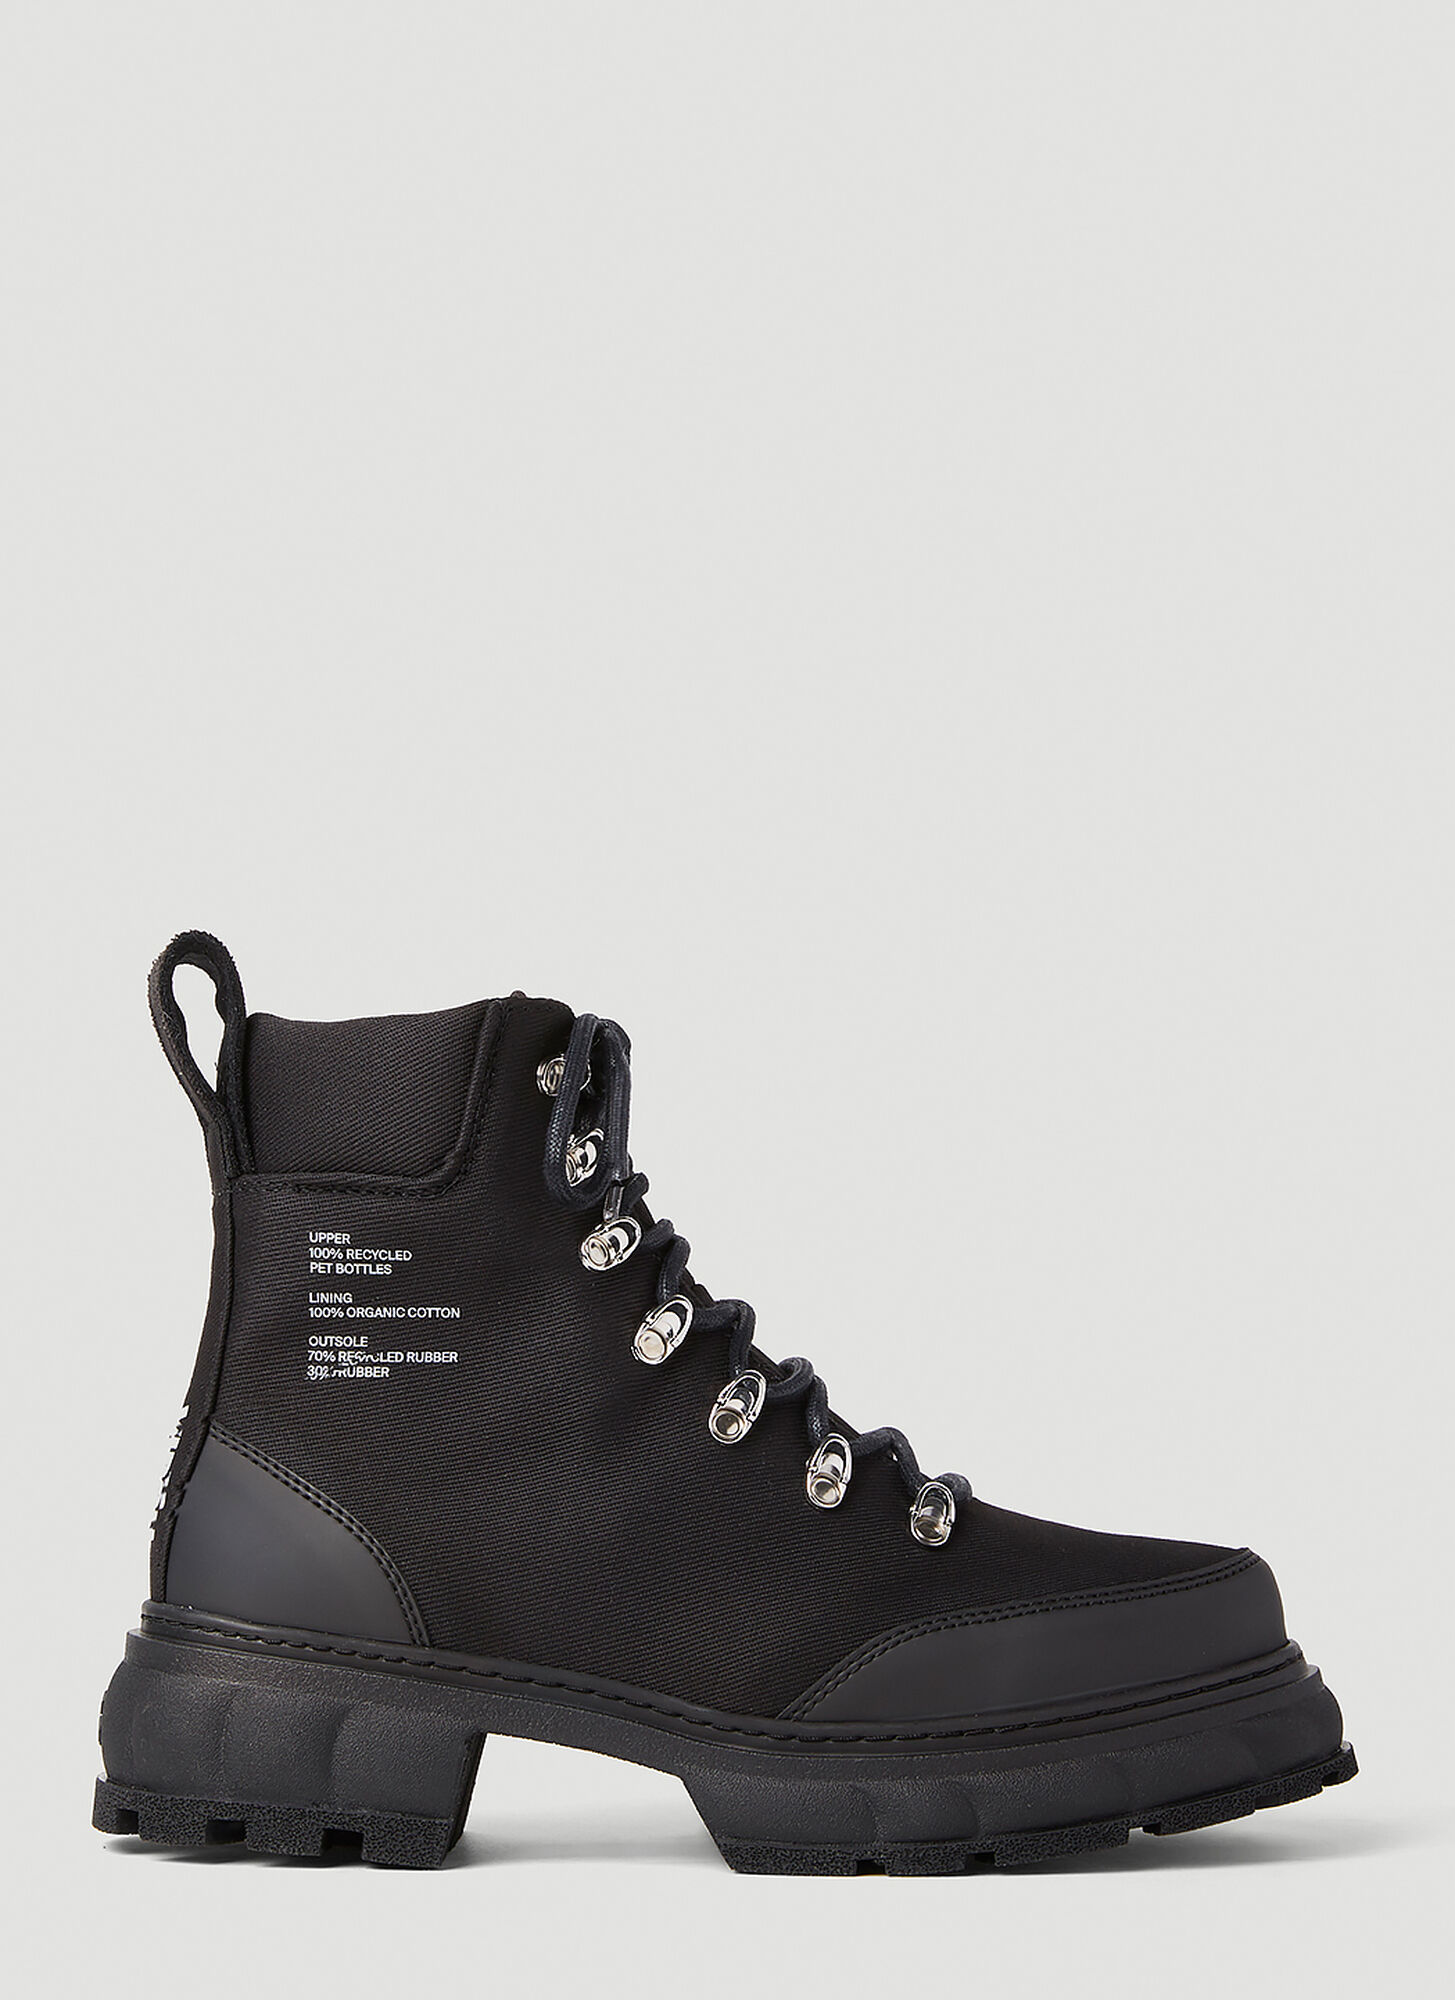 Viron Disruptor Boots In Black